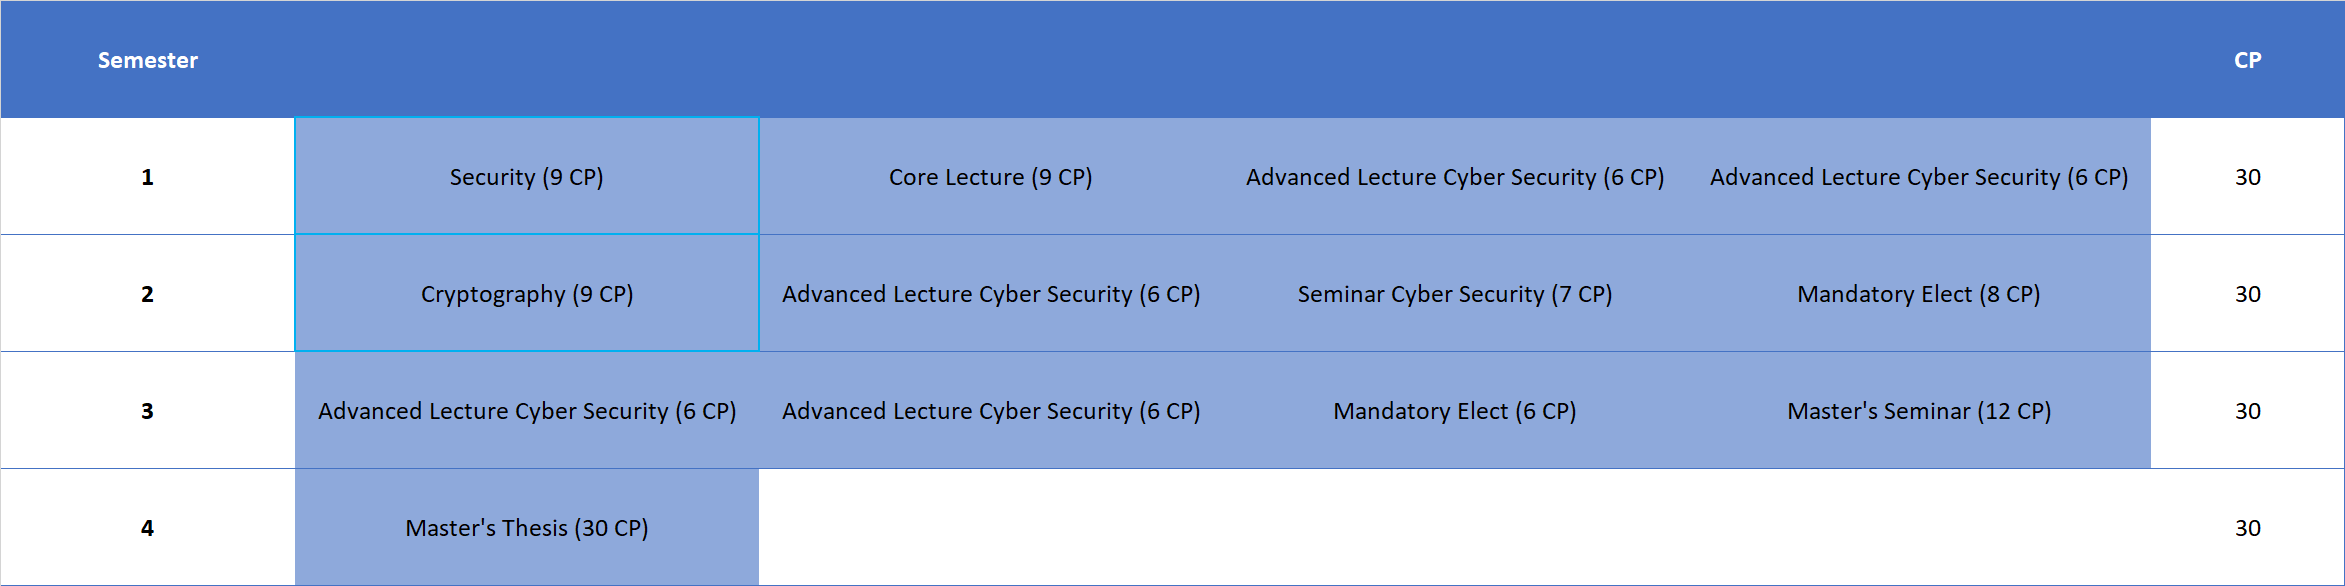 Example Schedule for Students with a Bachelor's Degree in Computer Science